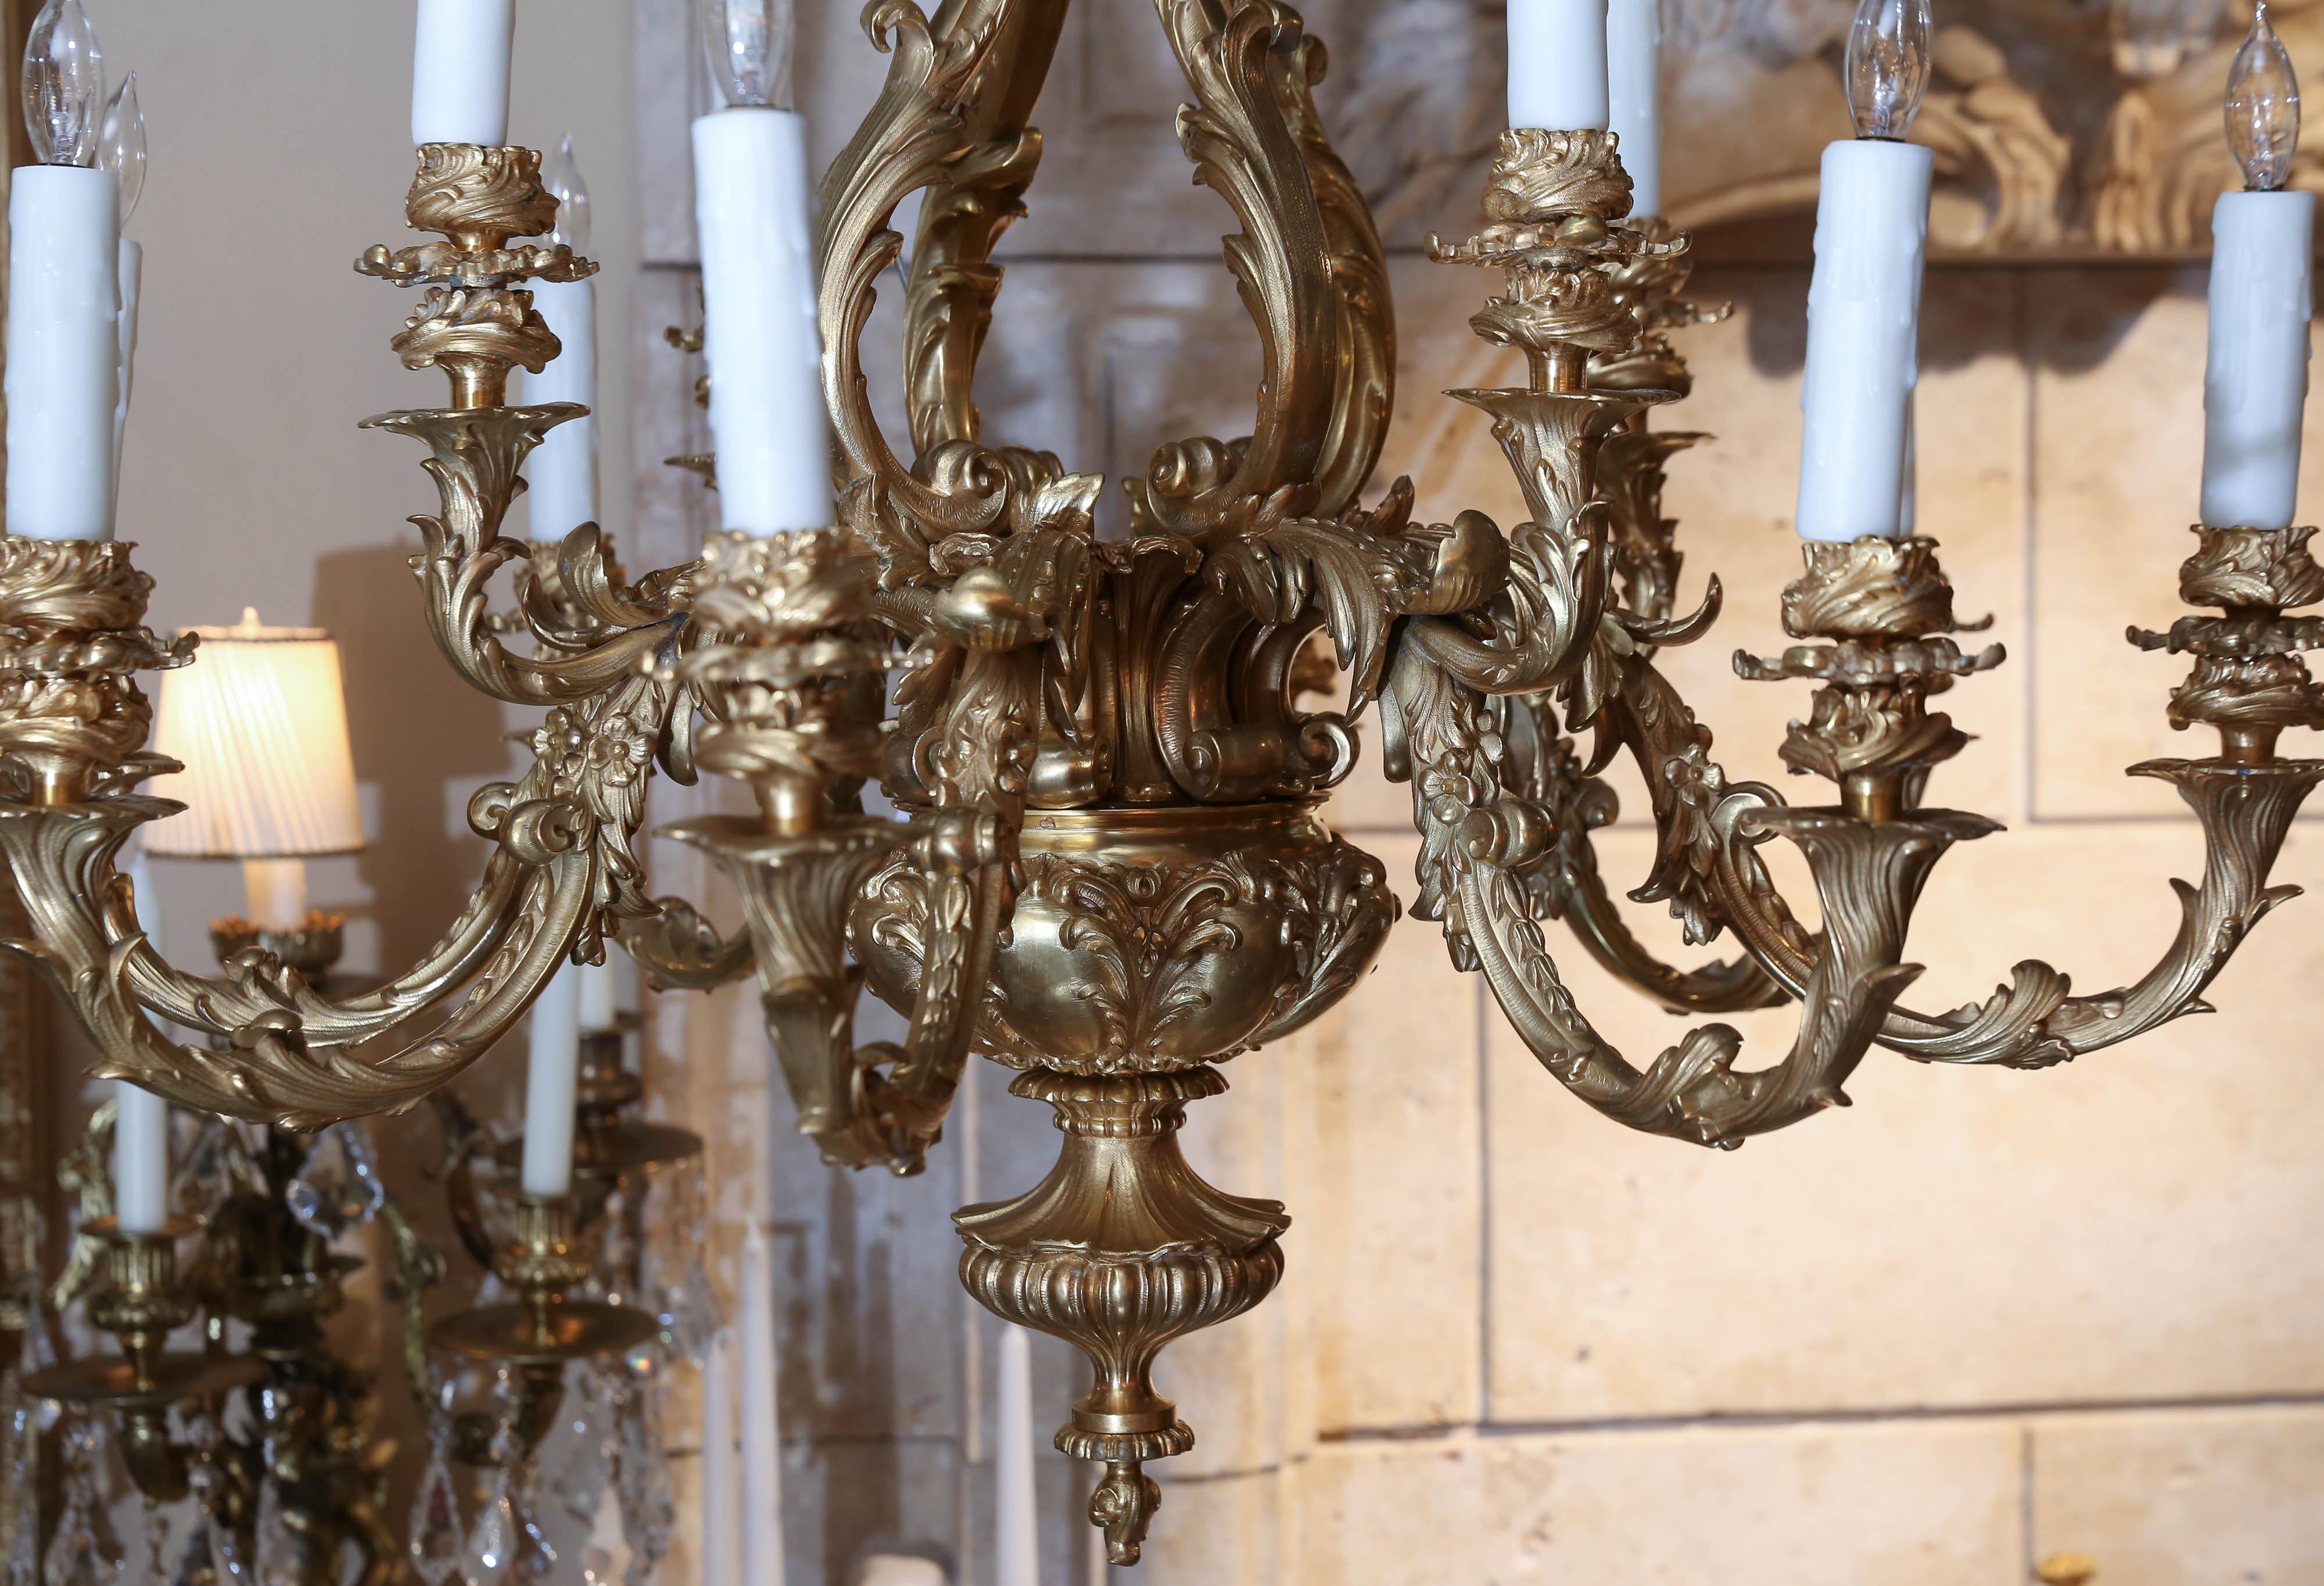 Exceptional twelve-light chandelier in bronze doré
Lovely casting and the gilding is of the highest quality.